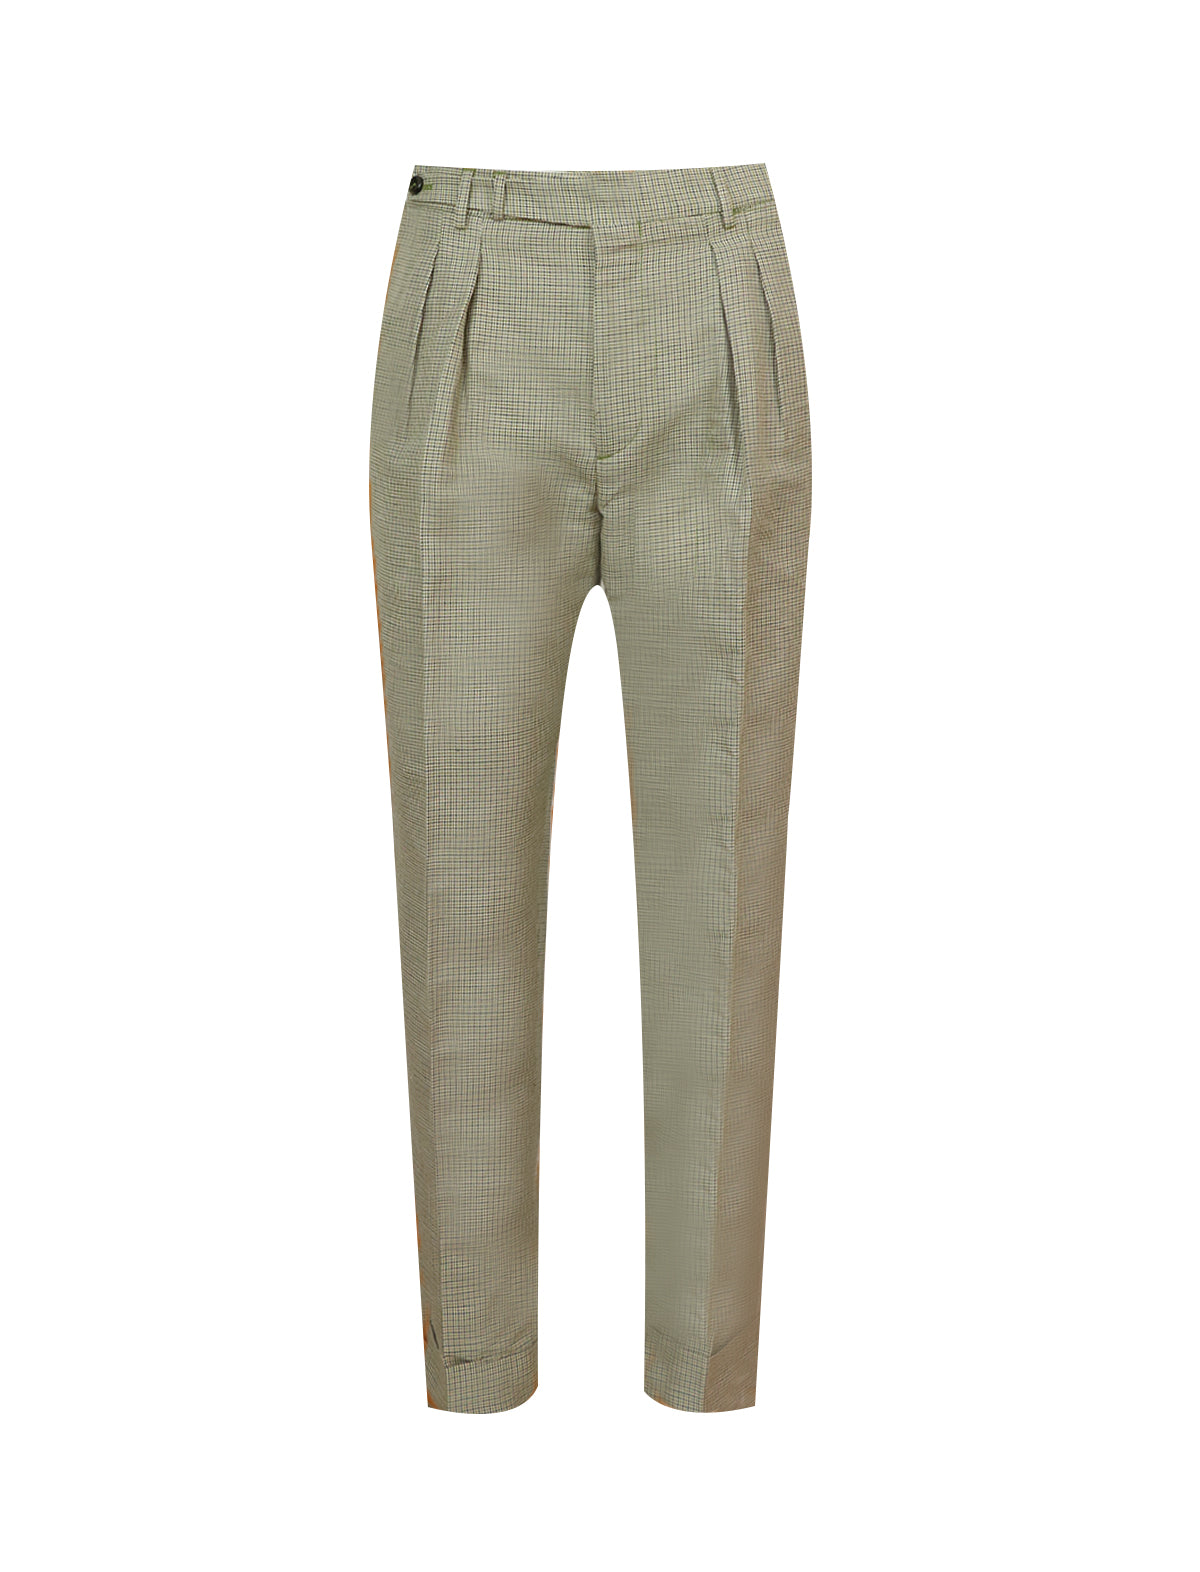 PT Torino Linen-Cotton Pants in Yellow Houndstooth